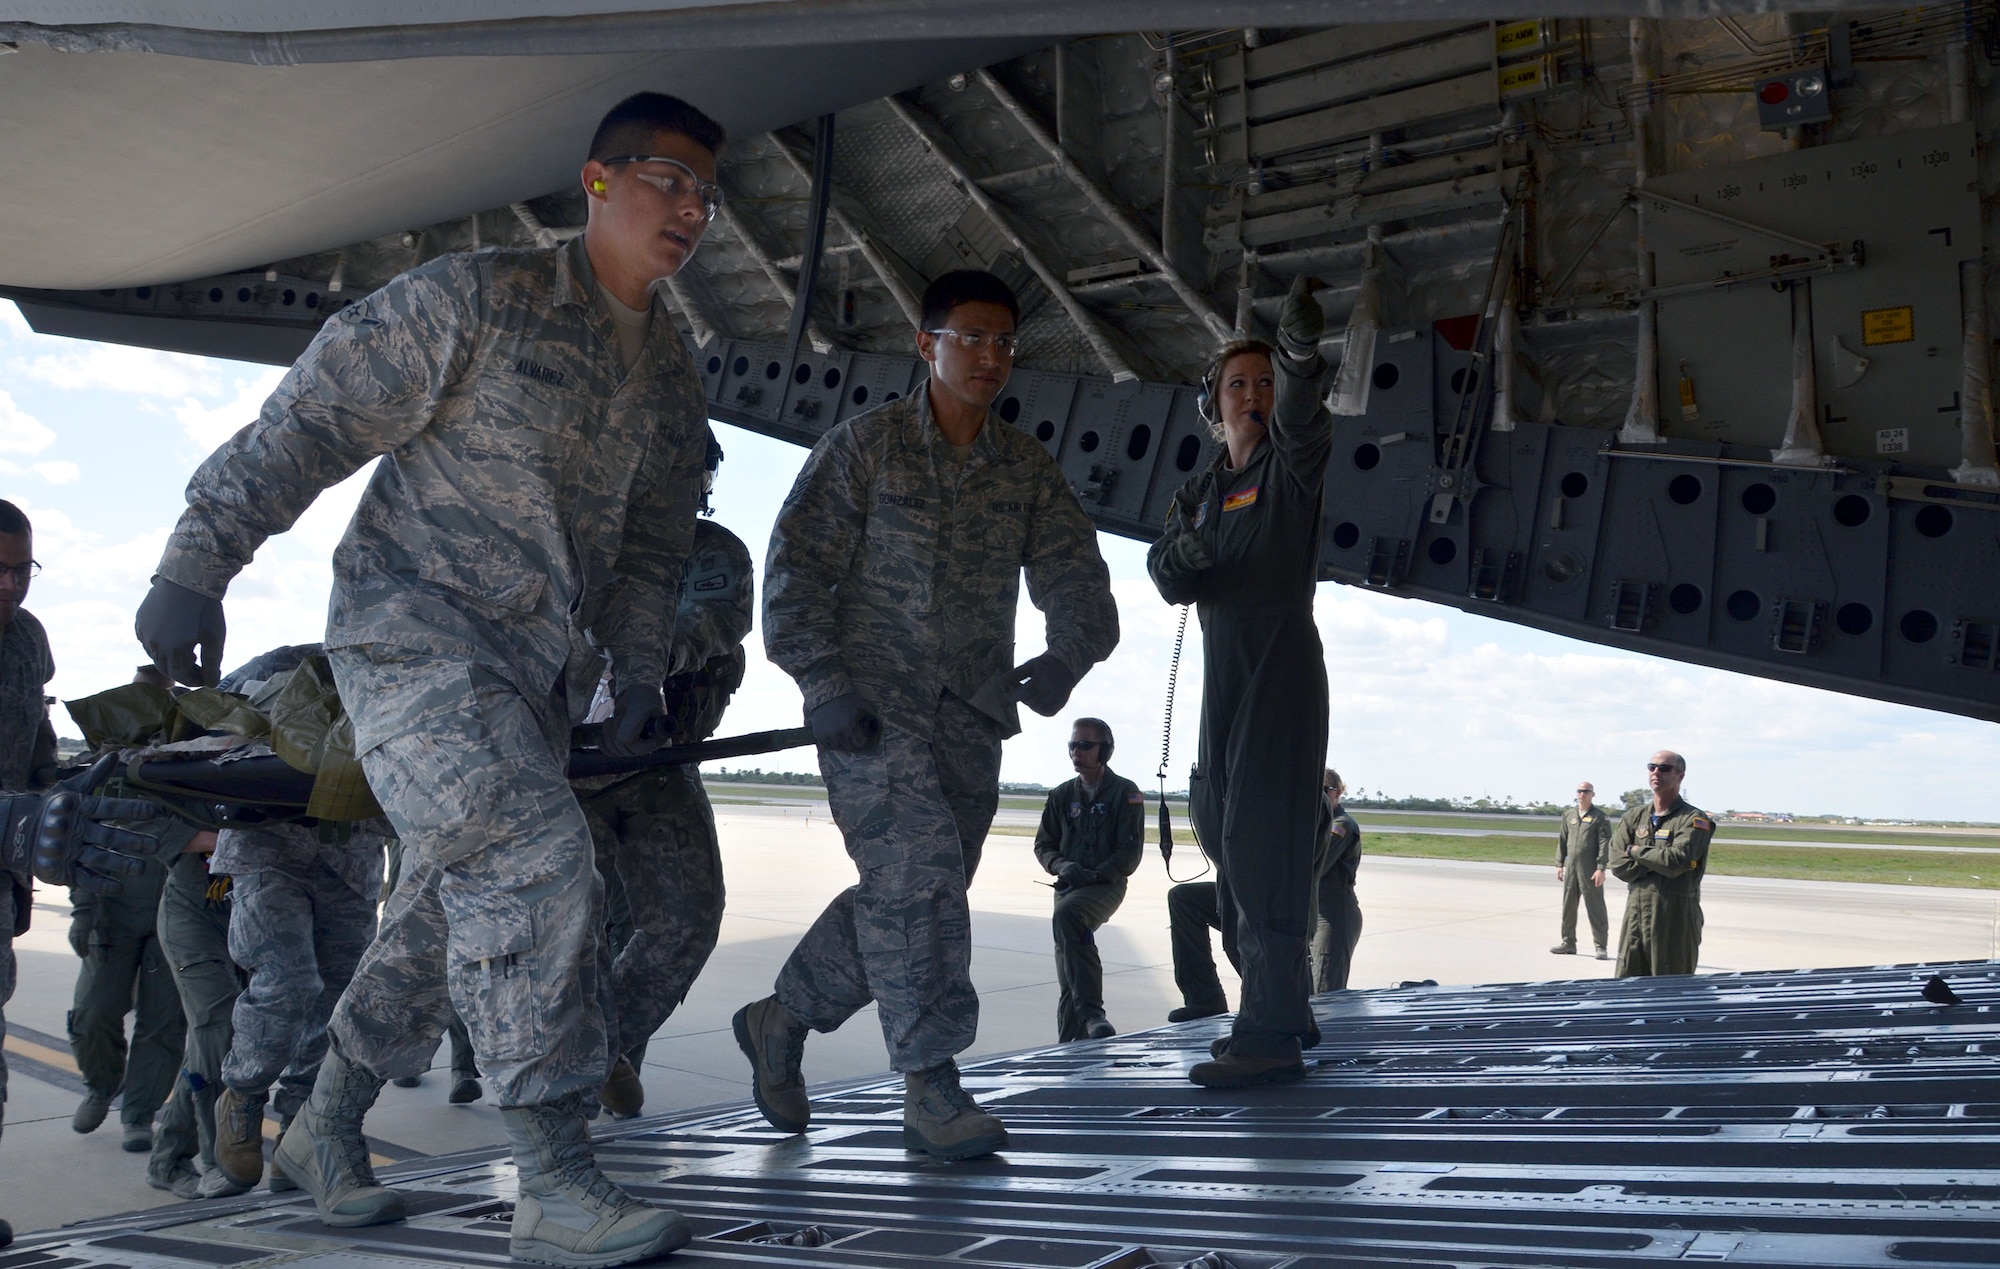 Air Force Reservists Airman Michael Alvarez, left, and Staff Sgt. Roberto Gonzalez, both with the 920th Aeromedical Staging Squadron, load a simulated patient onto a C-17 Globemaster III during the 5th annual MEDBEACH joint medical response exercise March 5, 2017 at Patrick Air Force Base, Florida. The C-17 Globemaster III and an Army National Guard UH-60 Black Hawk were flown in to provide a staging platform for stabilization and transport of battlefield-injured service members. (U.S. Air Force photo/Capt. Leslie Forshaw)